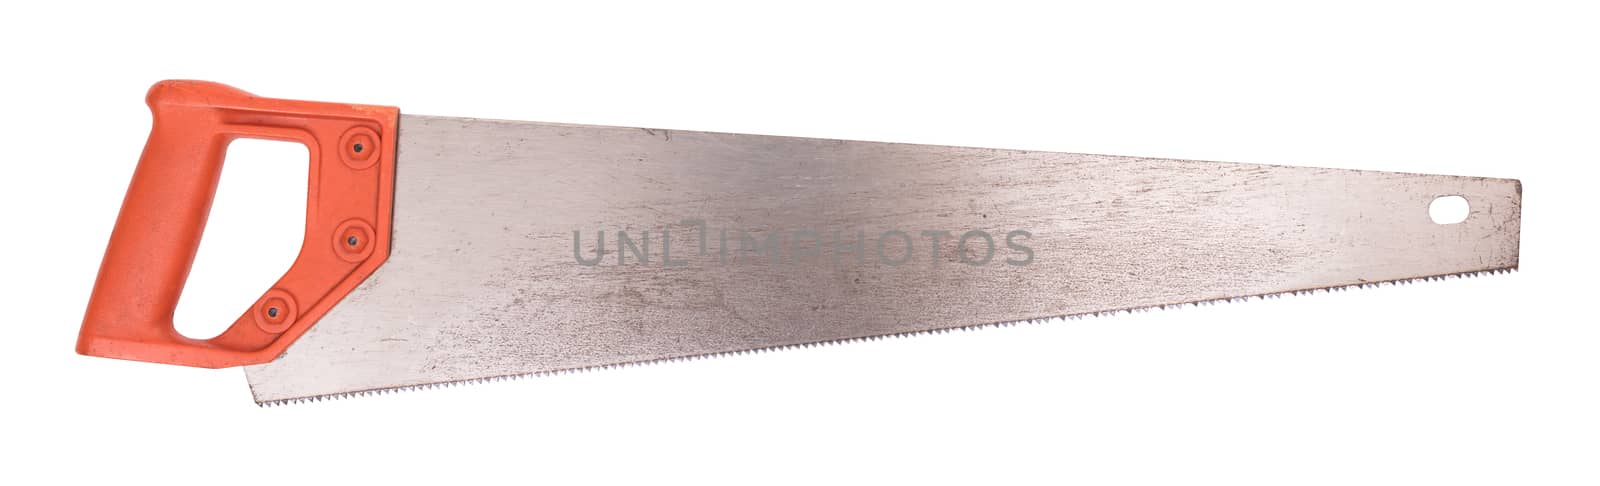 Hand saw isolated on a white background